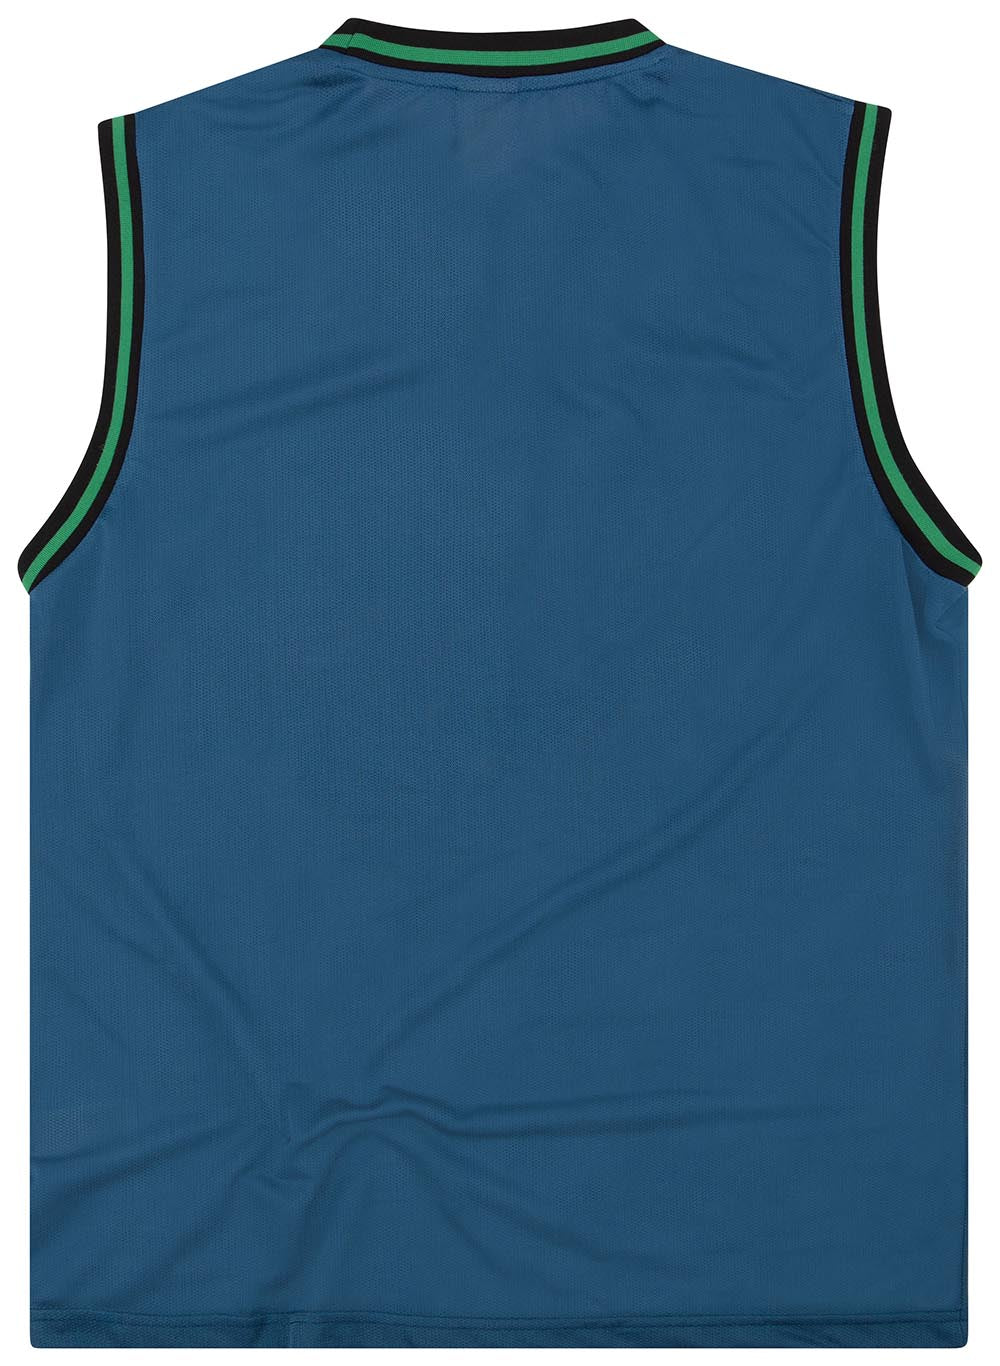 The Iconic Timberwolves Throwback Black/Green Jerseys from the 1990's